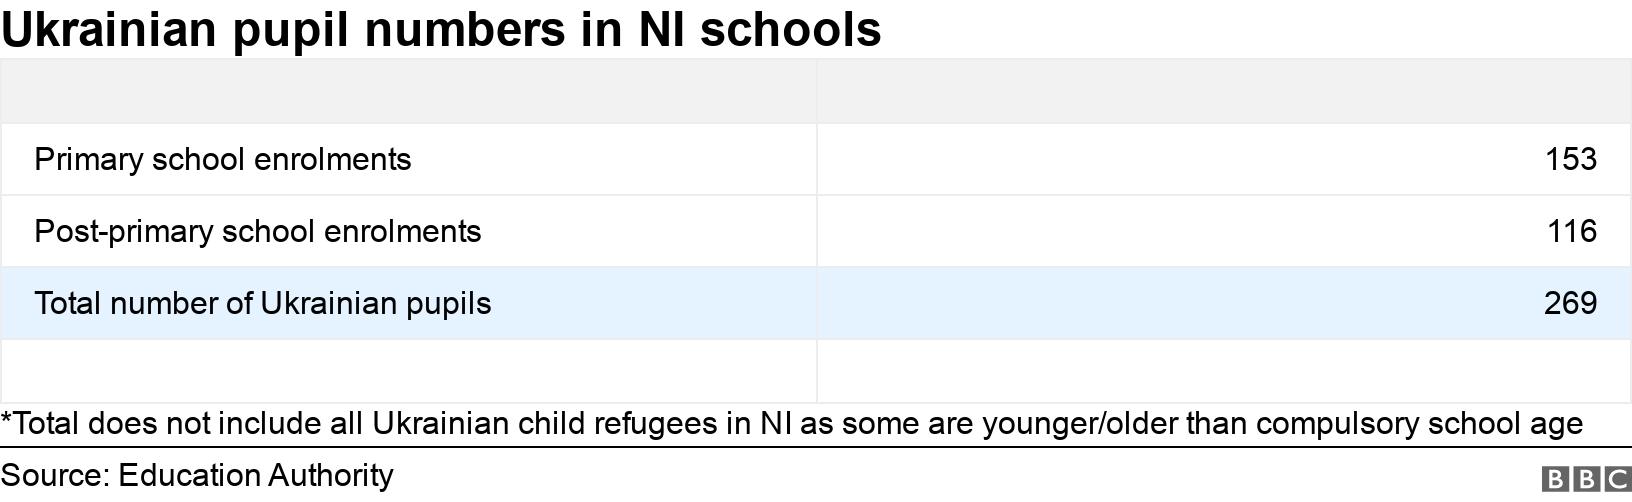 Ukrainian pupil numbers in  NI schools. .  *Total does not include all Ukrainian child refugees in NI as some are younger/older than compulsory school age  .